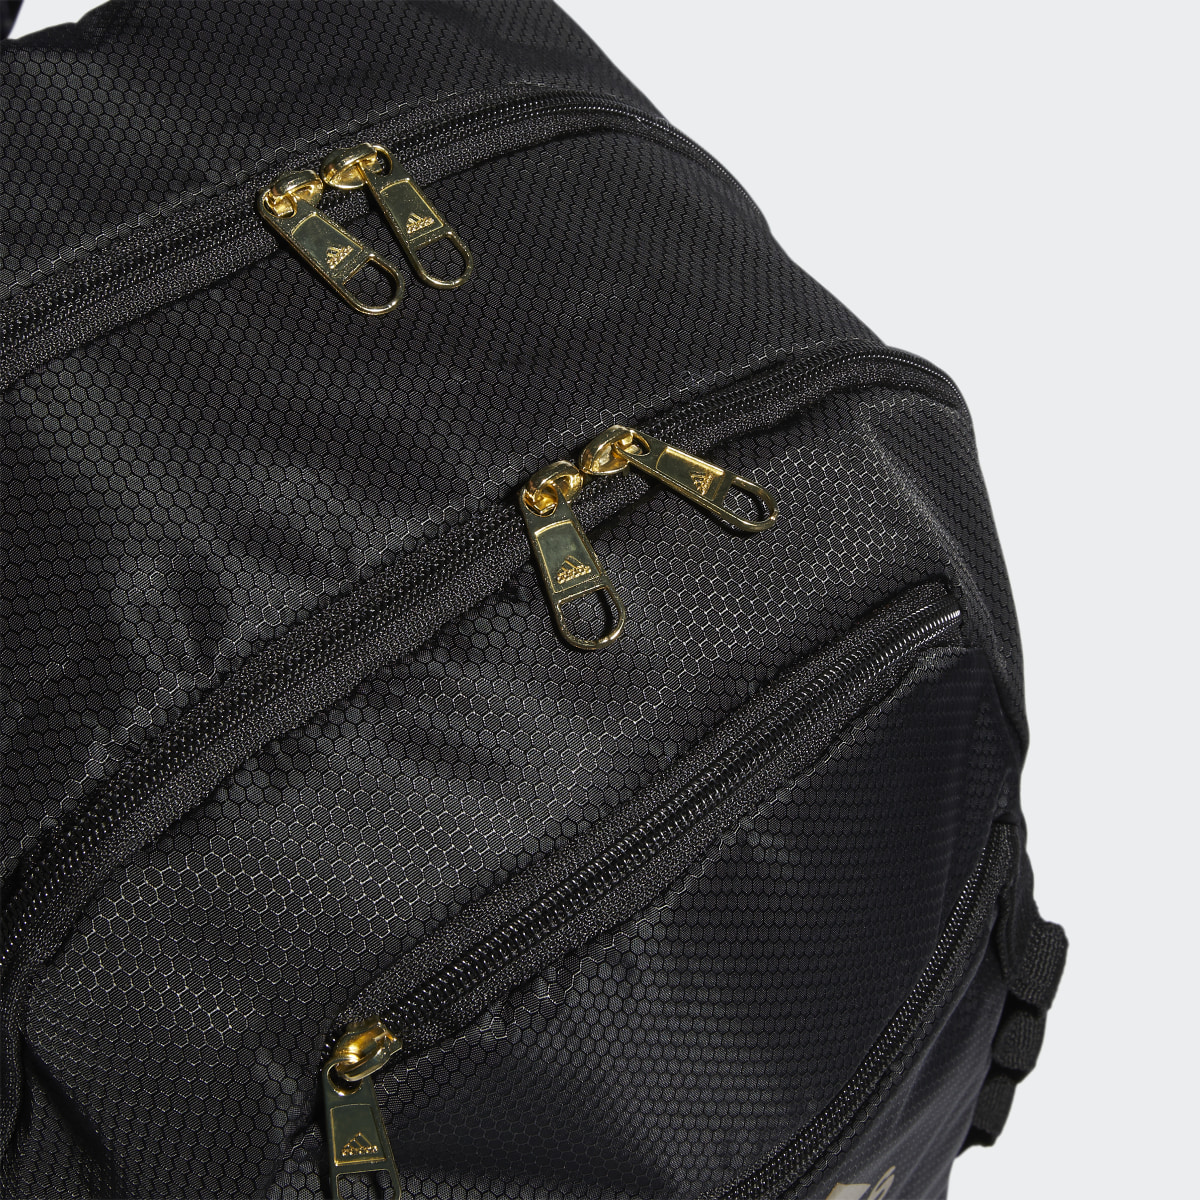 Adidas Excel Backpack. 6